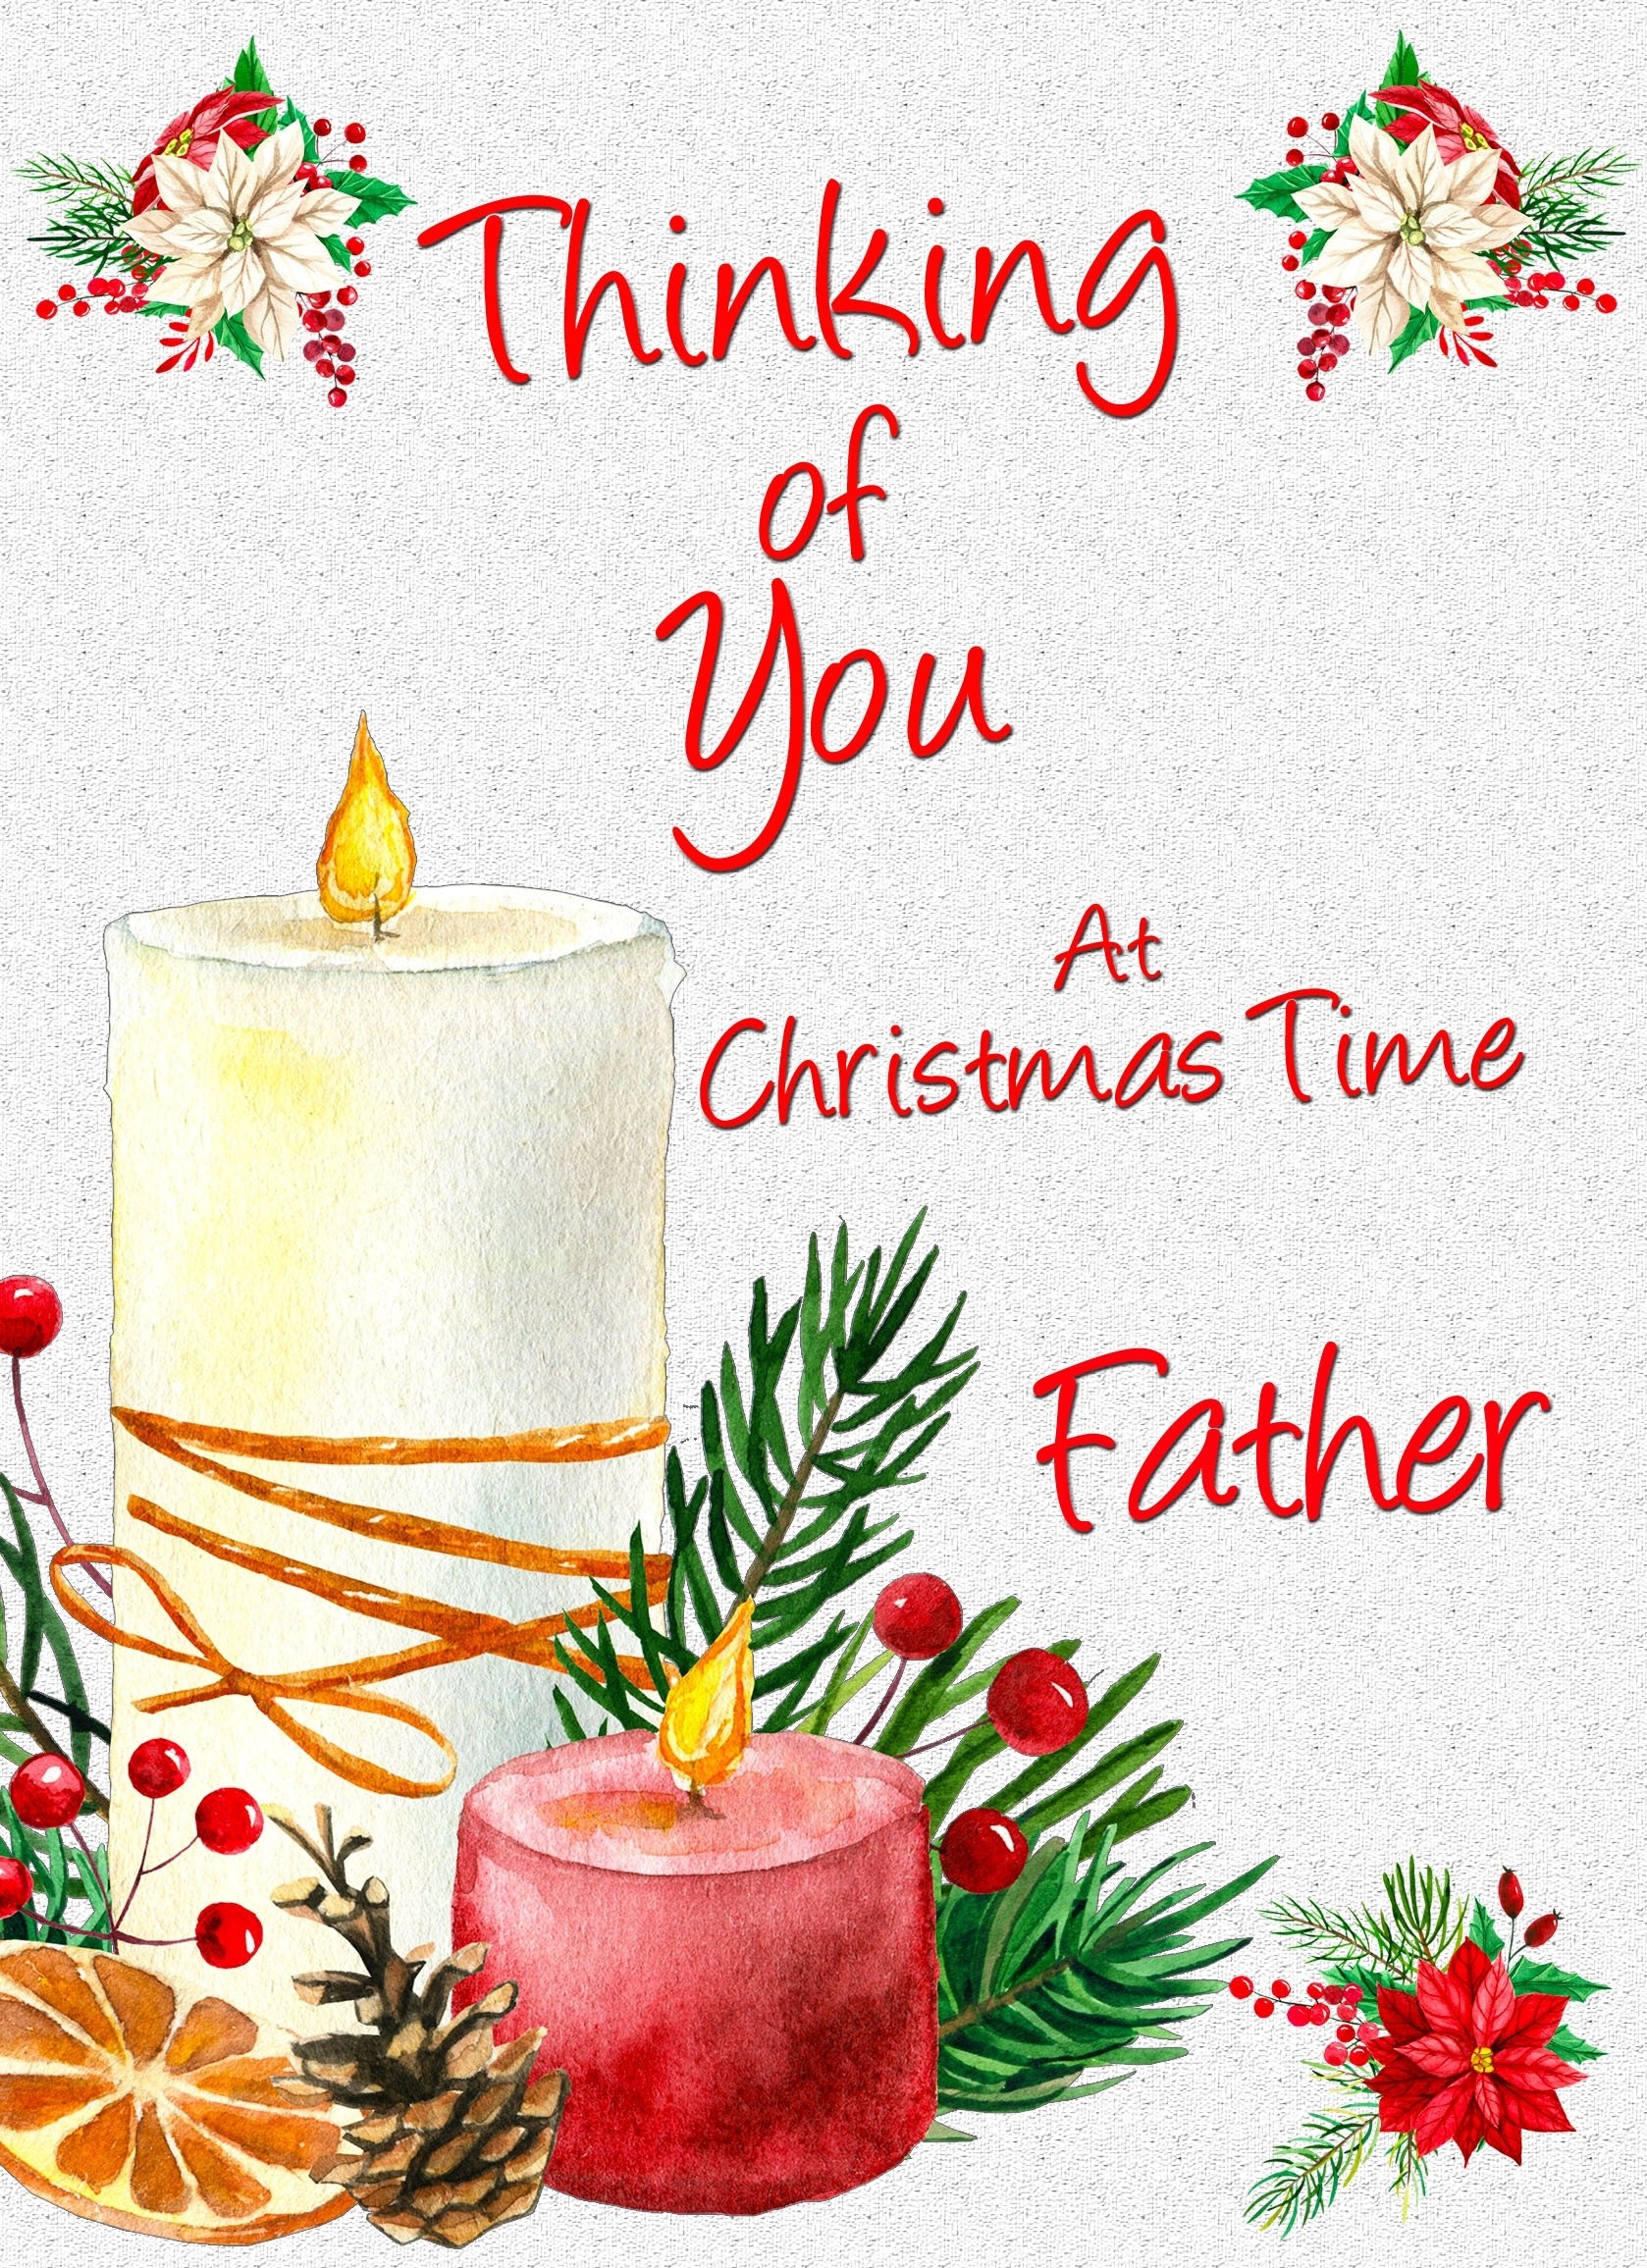 Thinking of You at Christmas Card For Father (Candle)